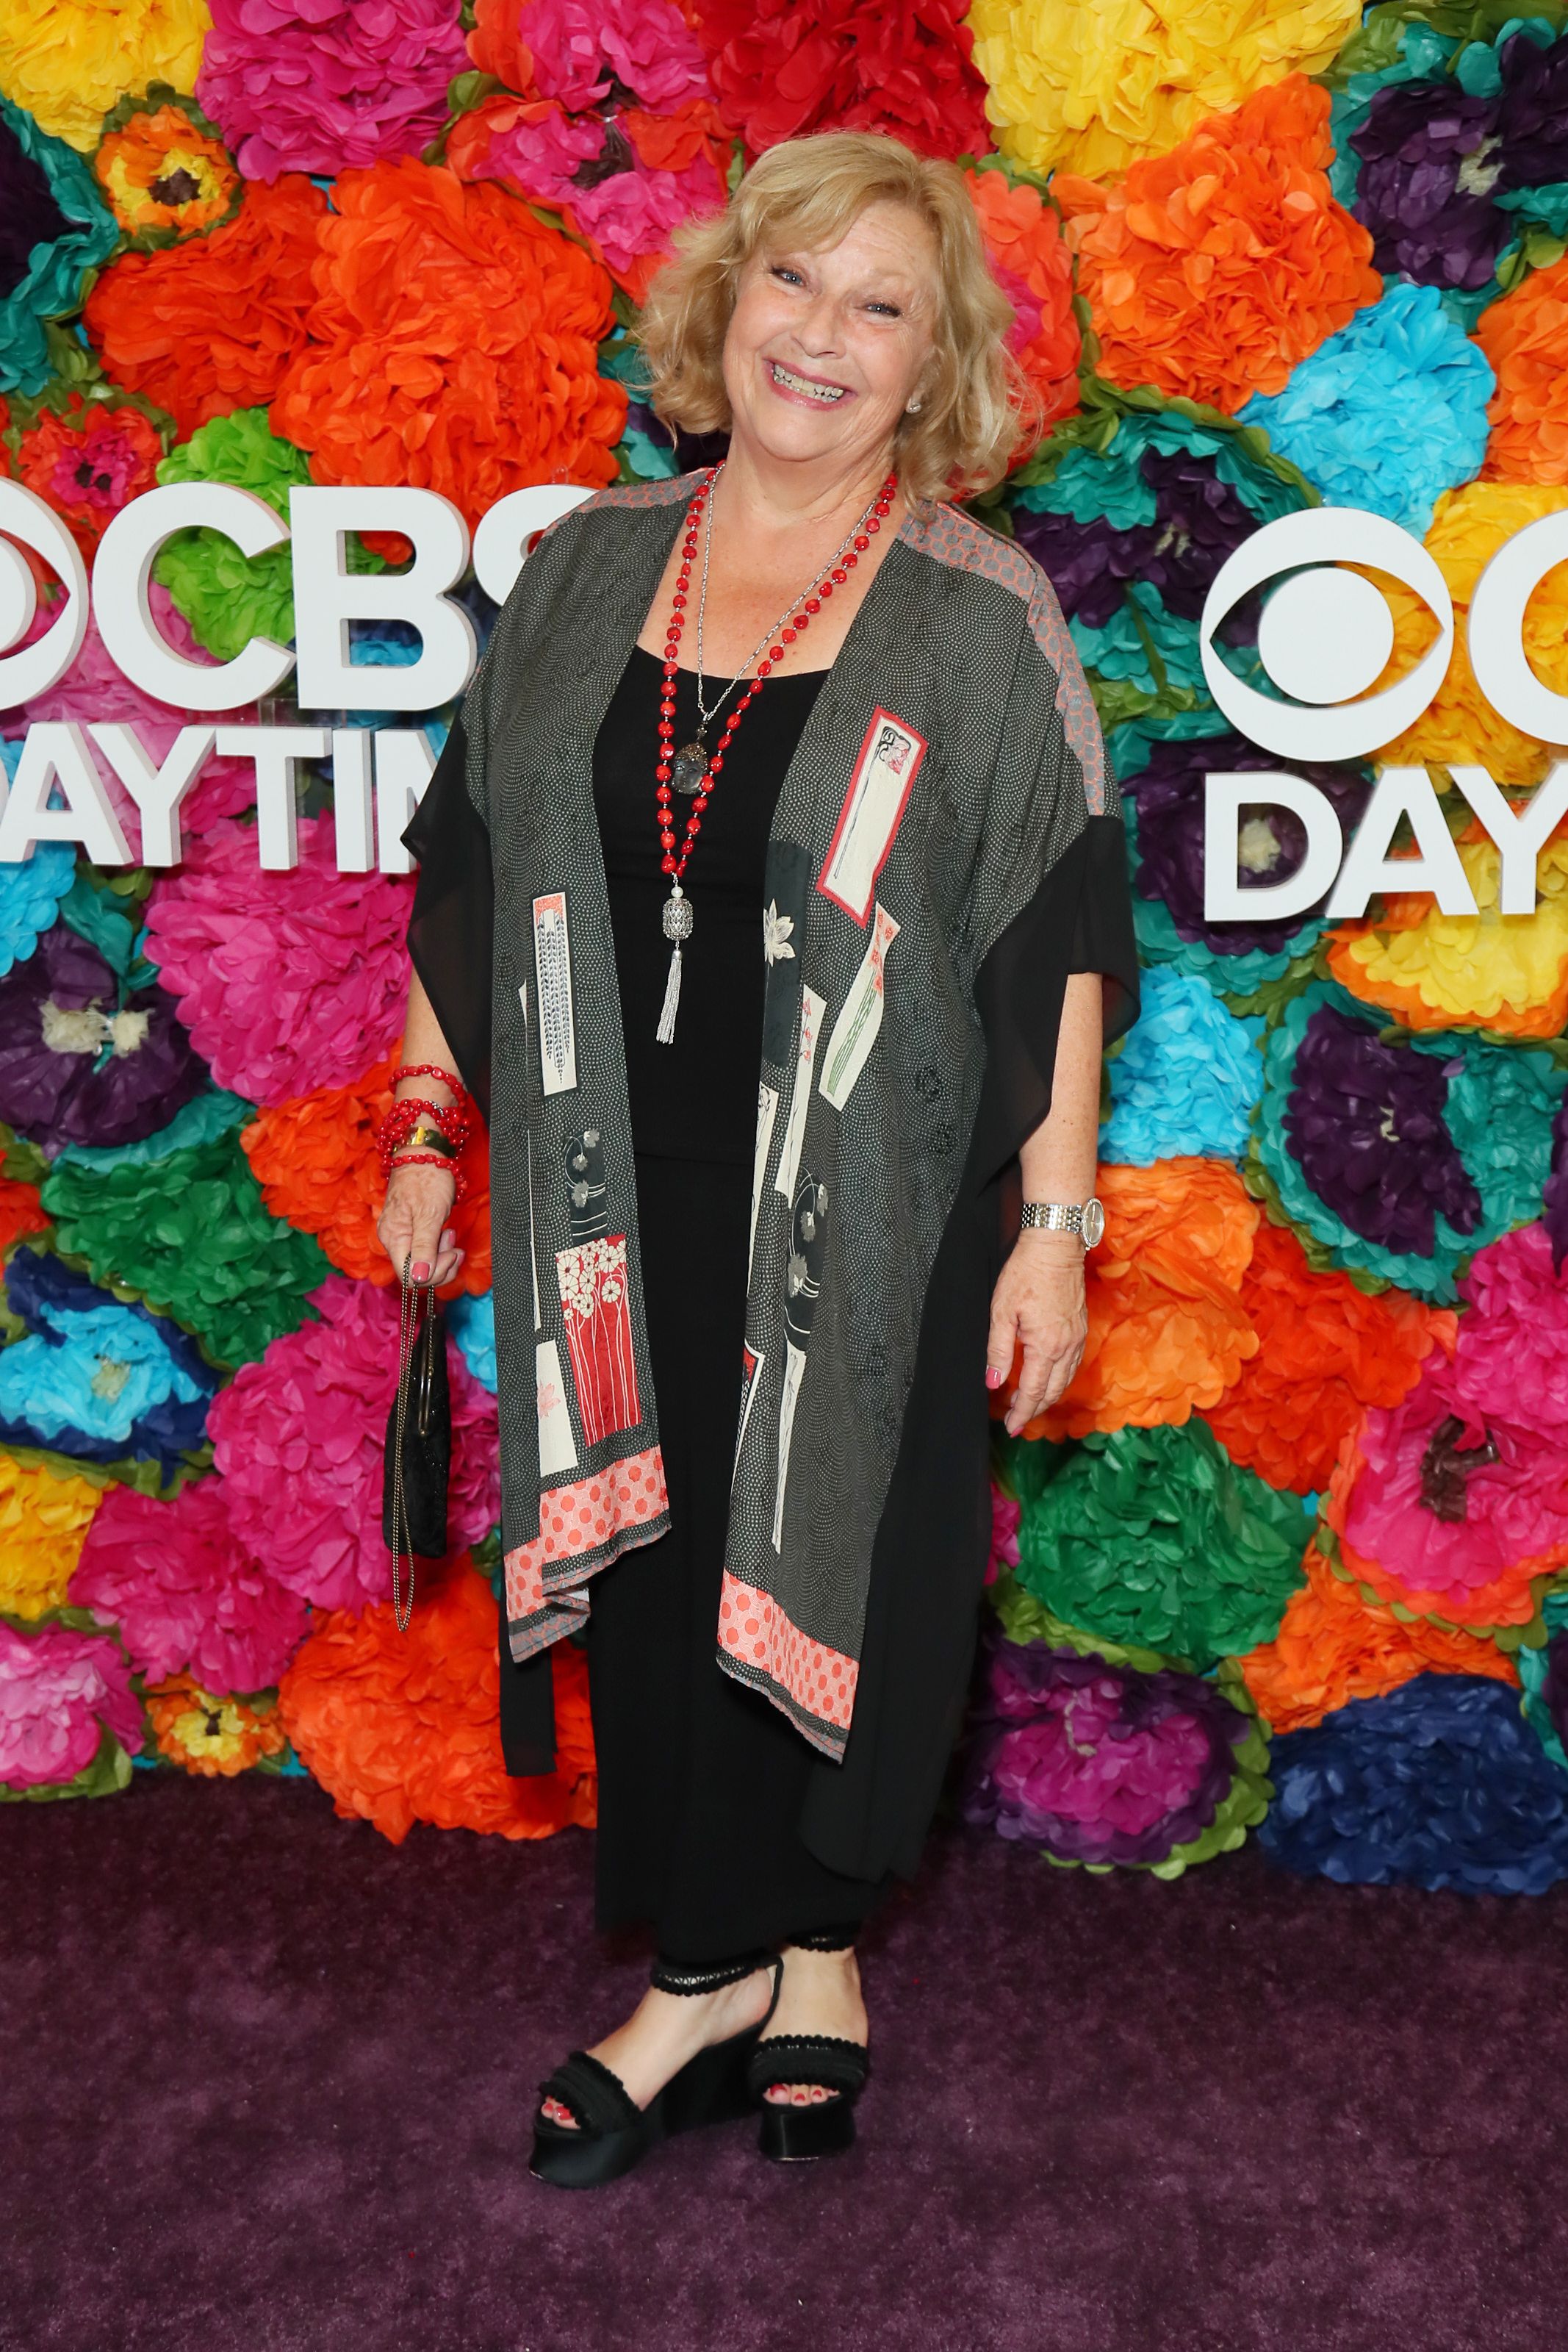 Beth Maitland attends CBS Daytime Emmy Awards After Party at Pasadena Convention Center on May 05, 2019 in Pasadena, California. | Photo: Getty Images